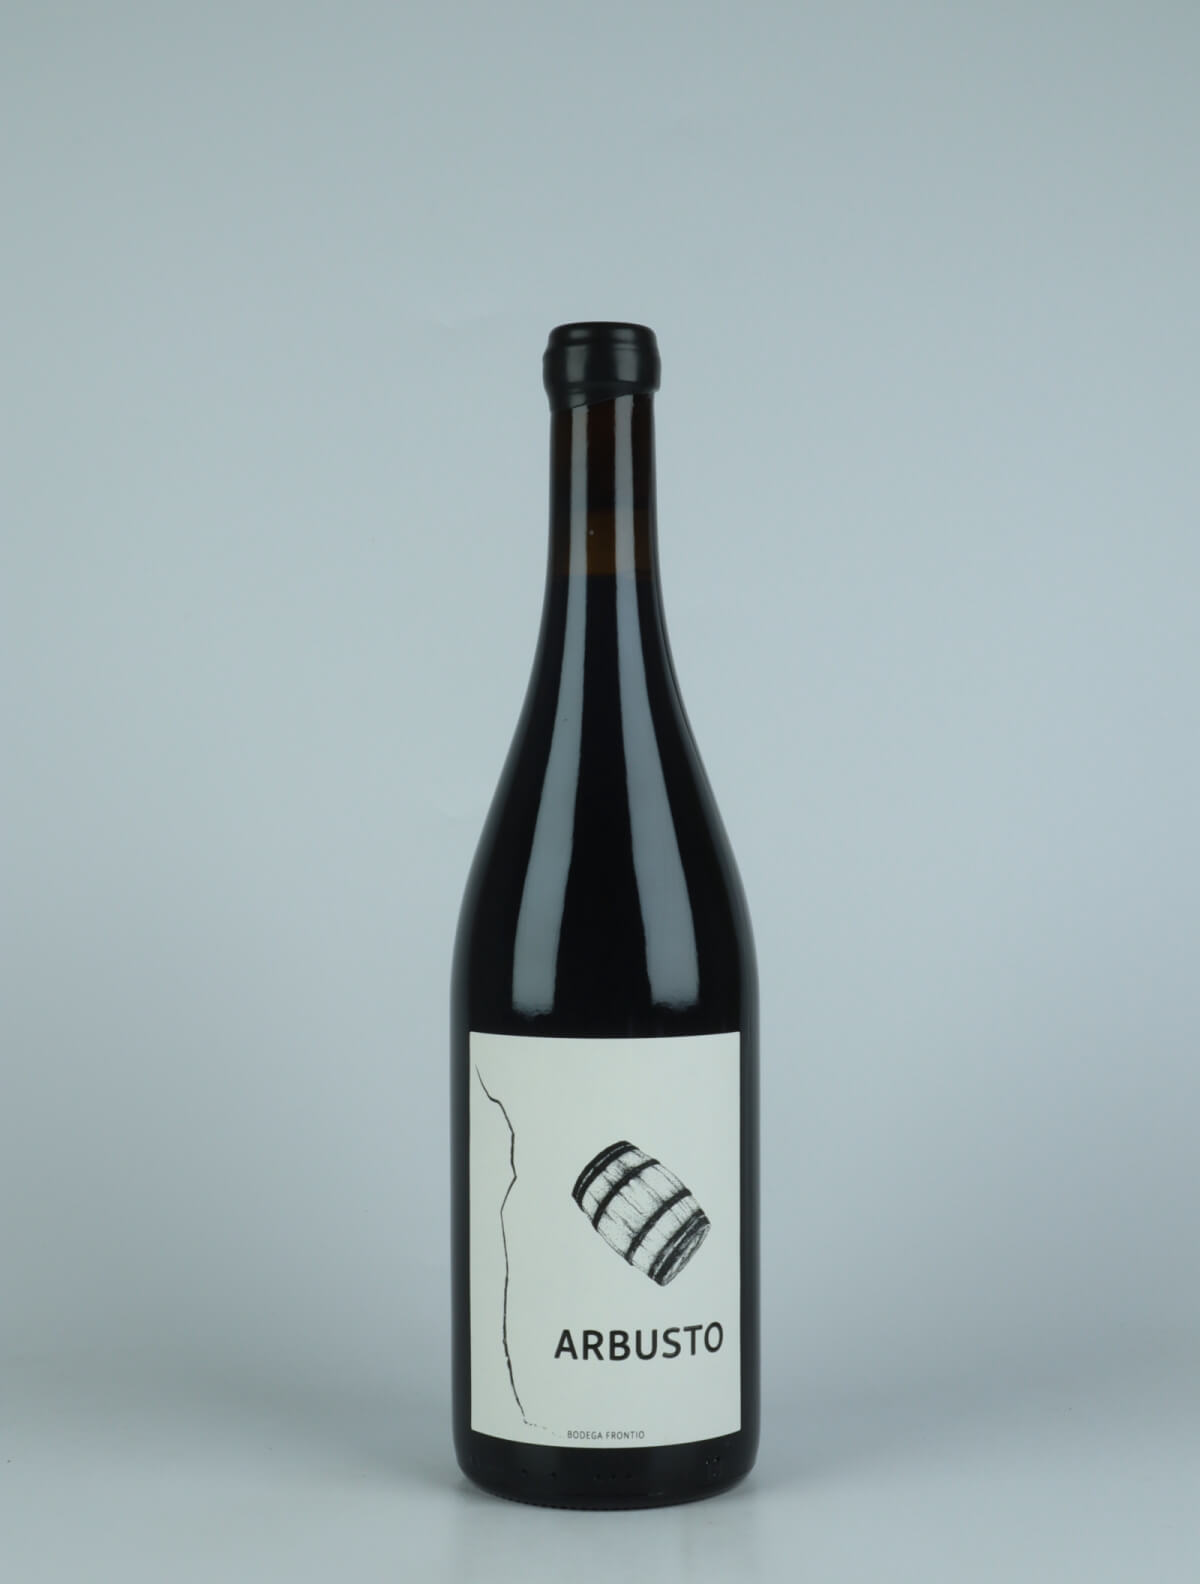 A bottle 2021 Arbusto Red wine from Bodega Frontio, Arribes in Spain